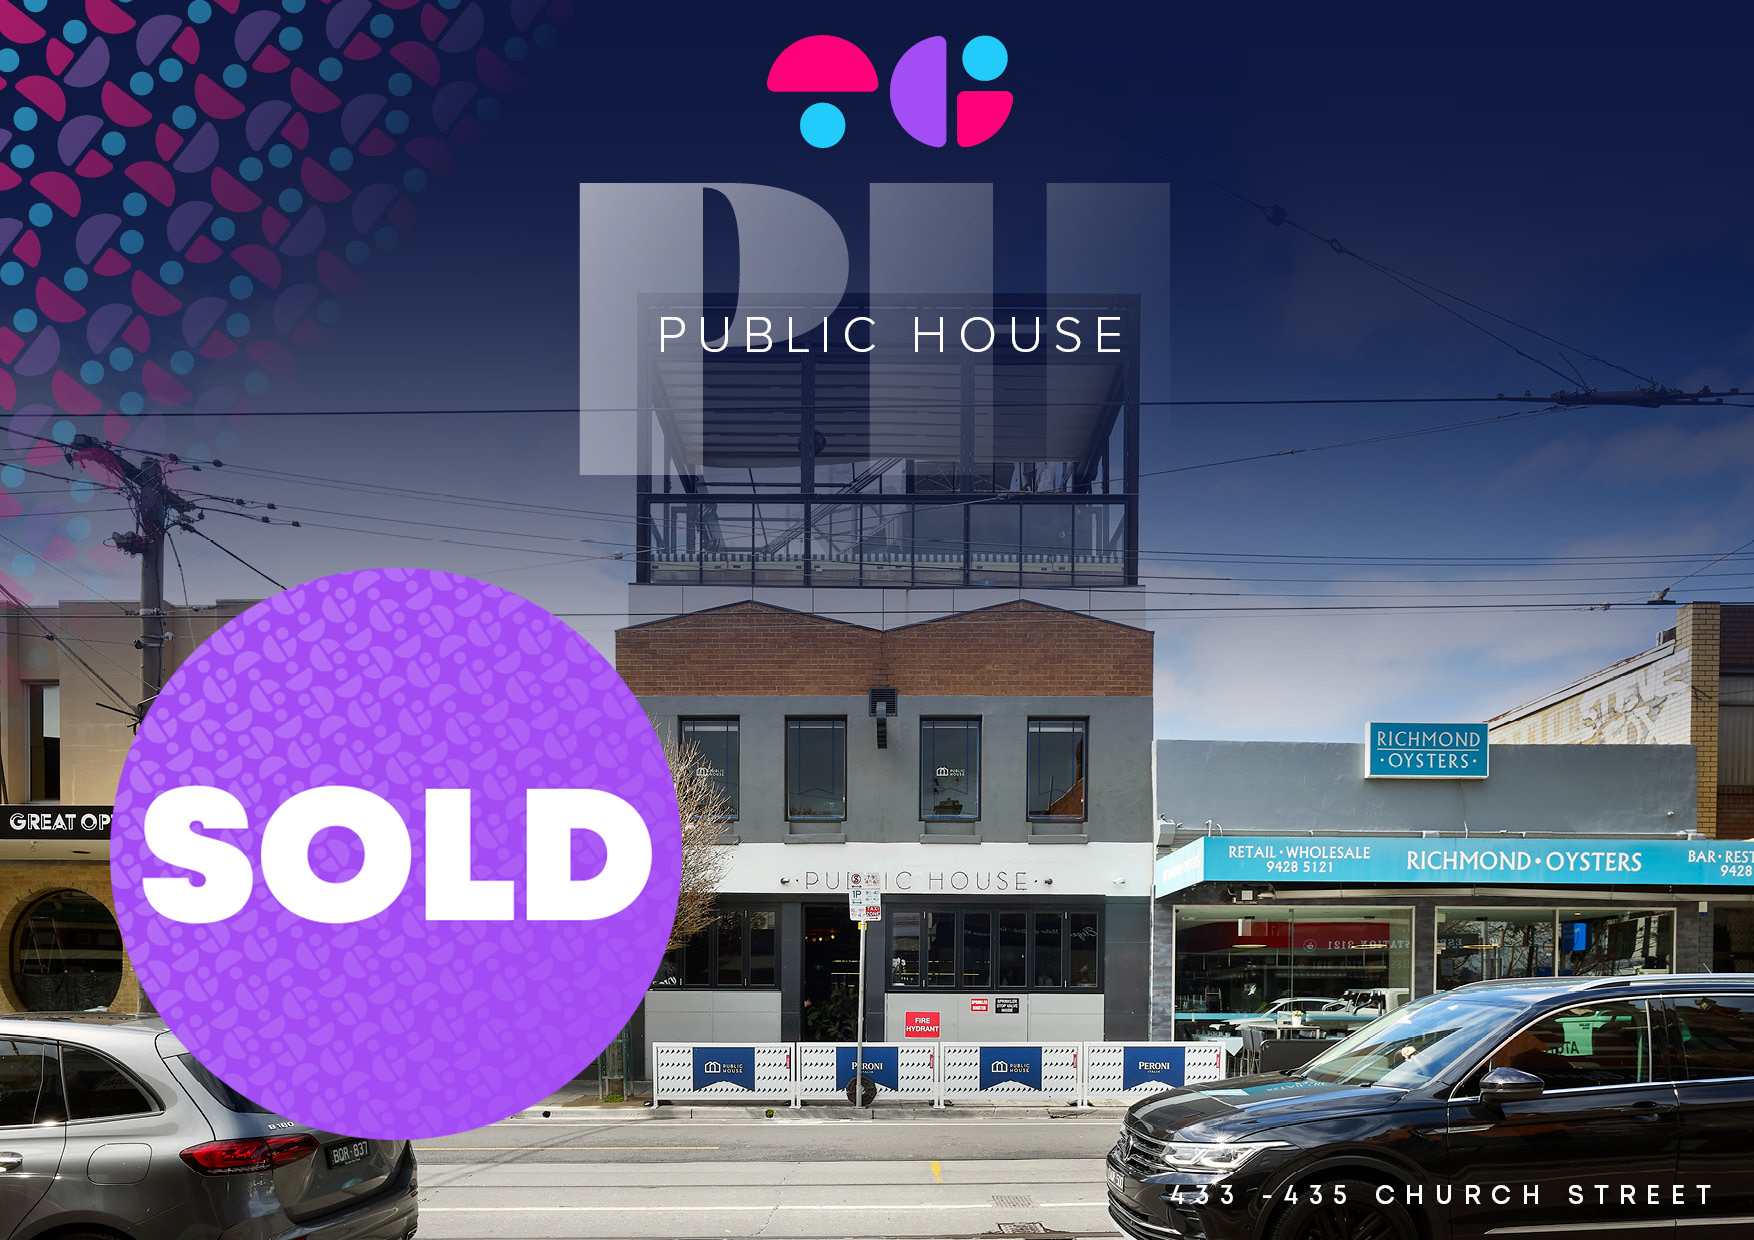 Sold Public House 433-435 Church Street Richmond Retail Investment Commercial Real Estate